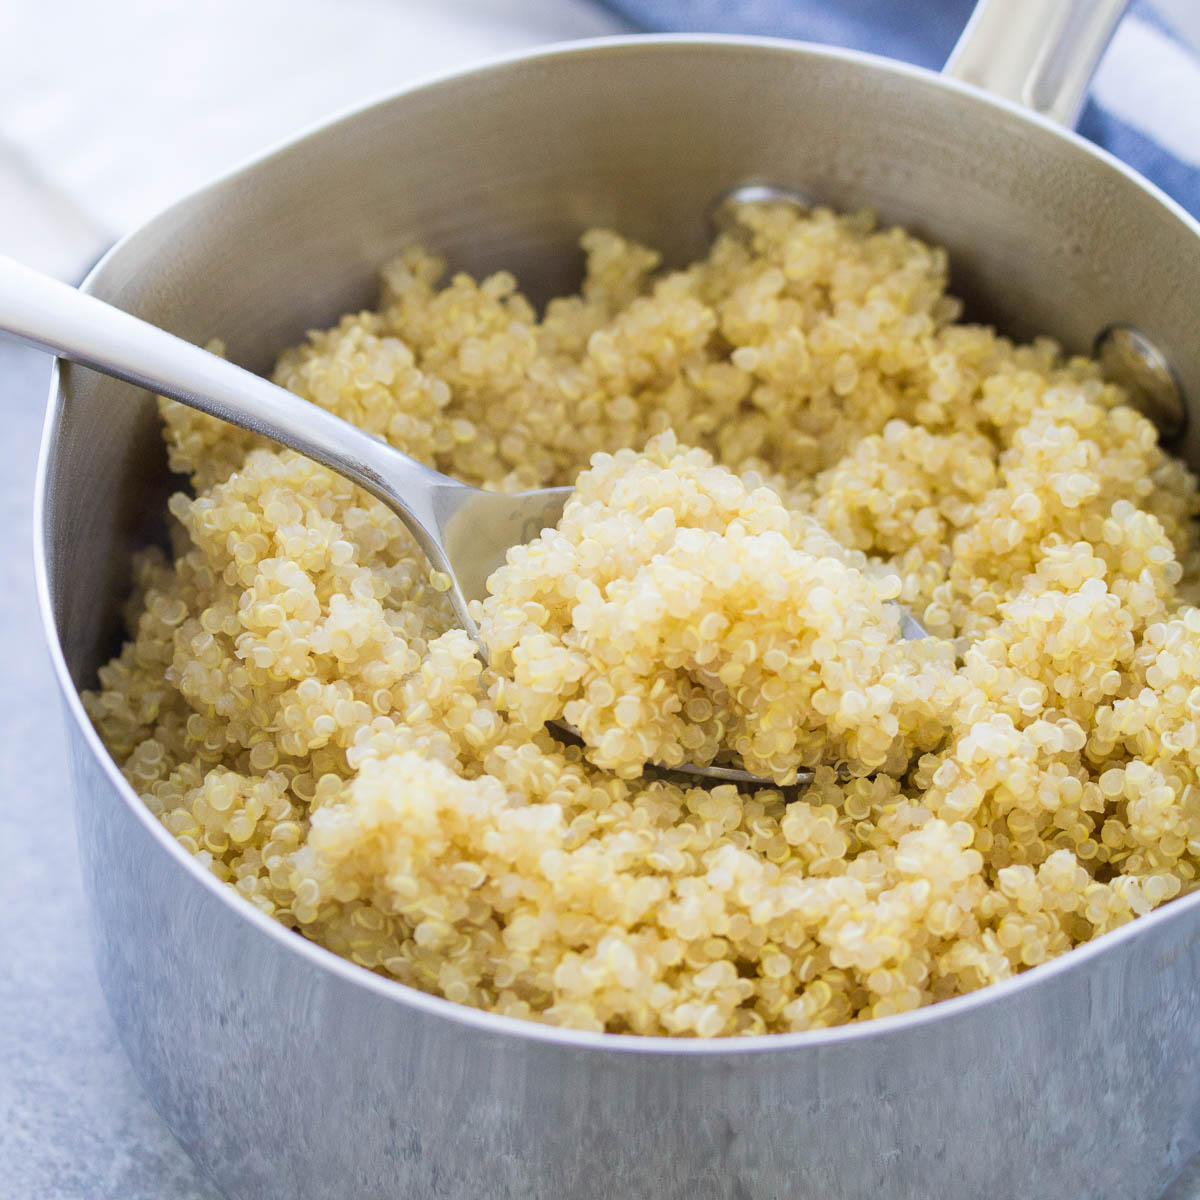 How To Store Quinoa After Cooking